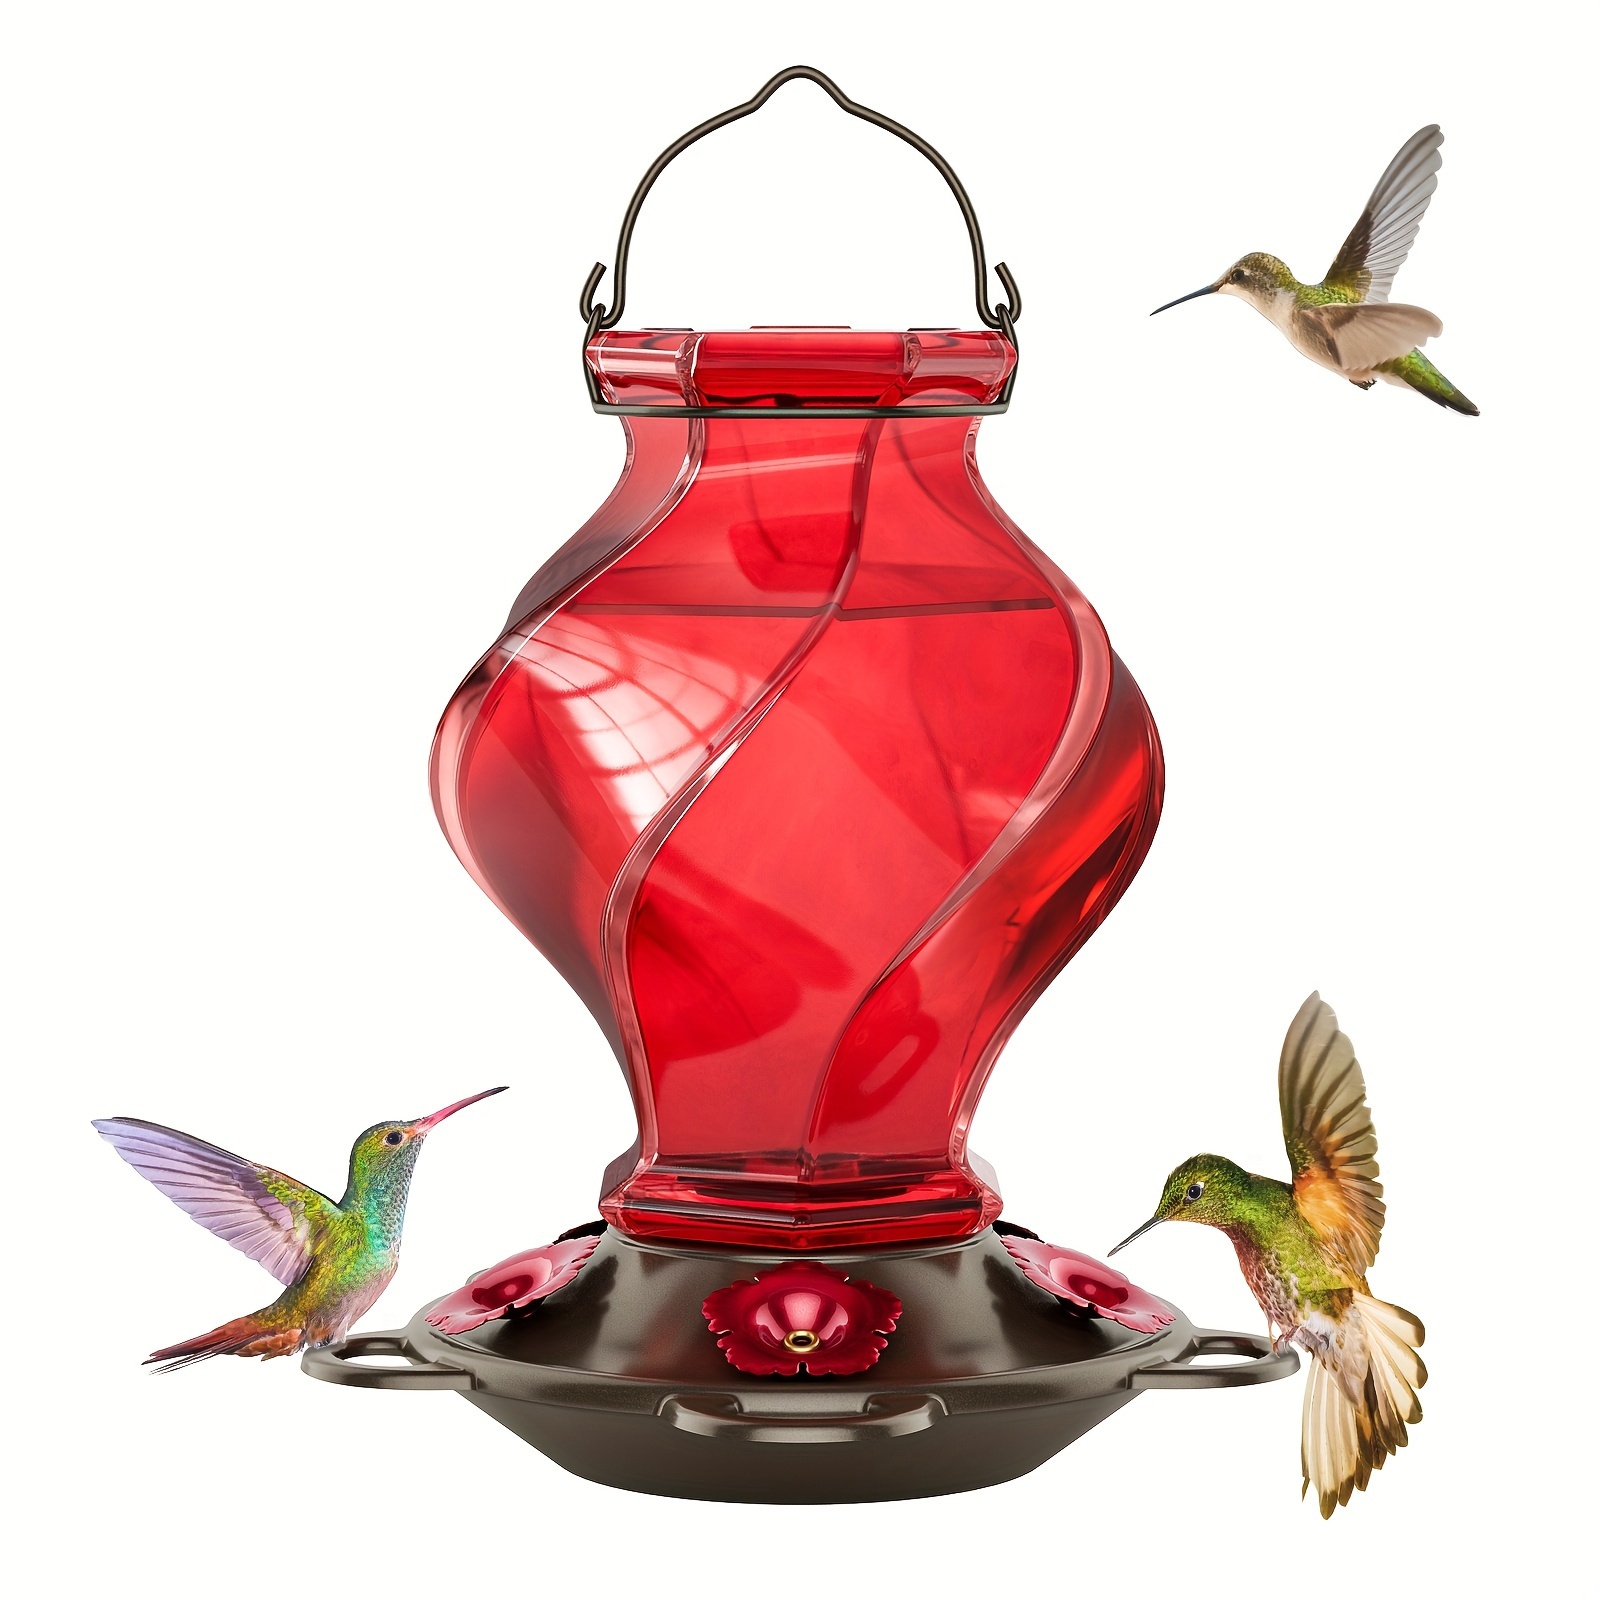 

Hummingbird Feeder, Hummingbird Feeders For Outdoors Hanging, 21 Ounces Glass Hummingbird Feeder With 5 Feeding Stations, Spiral Shape Glass Bottle, Red